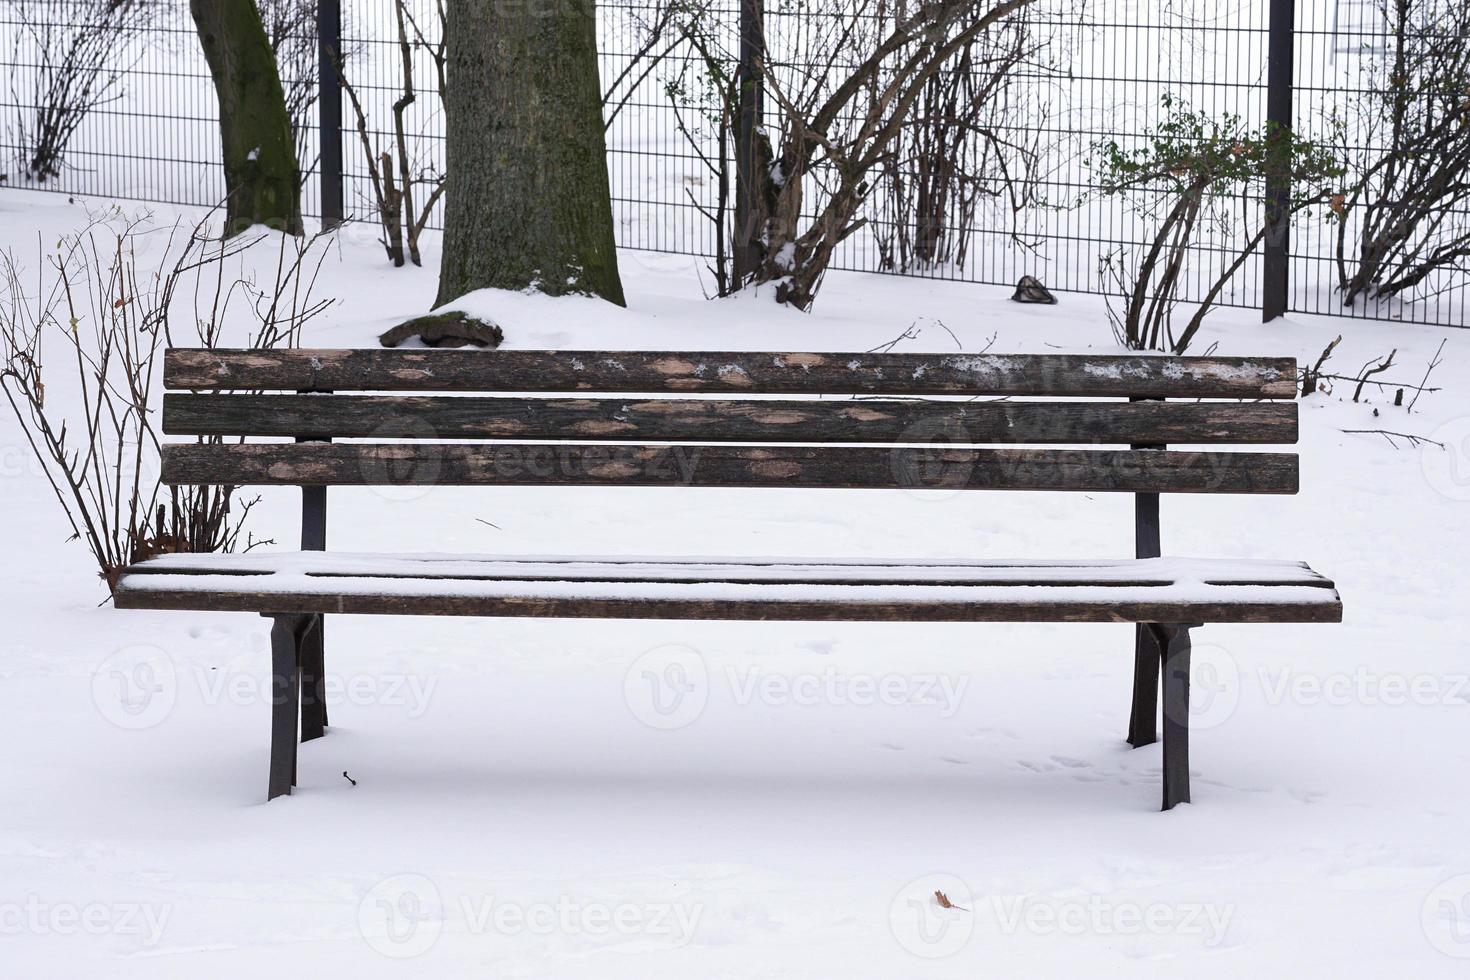 snow covered park bench photo